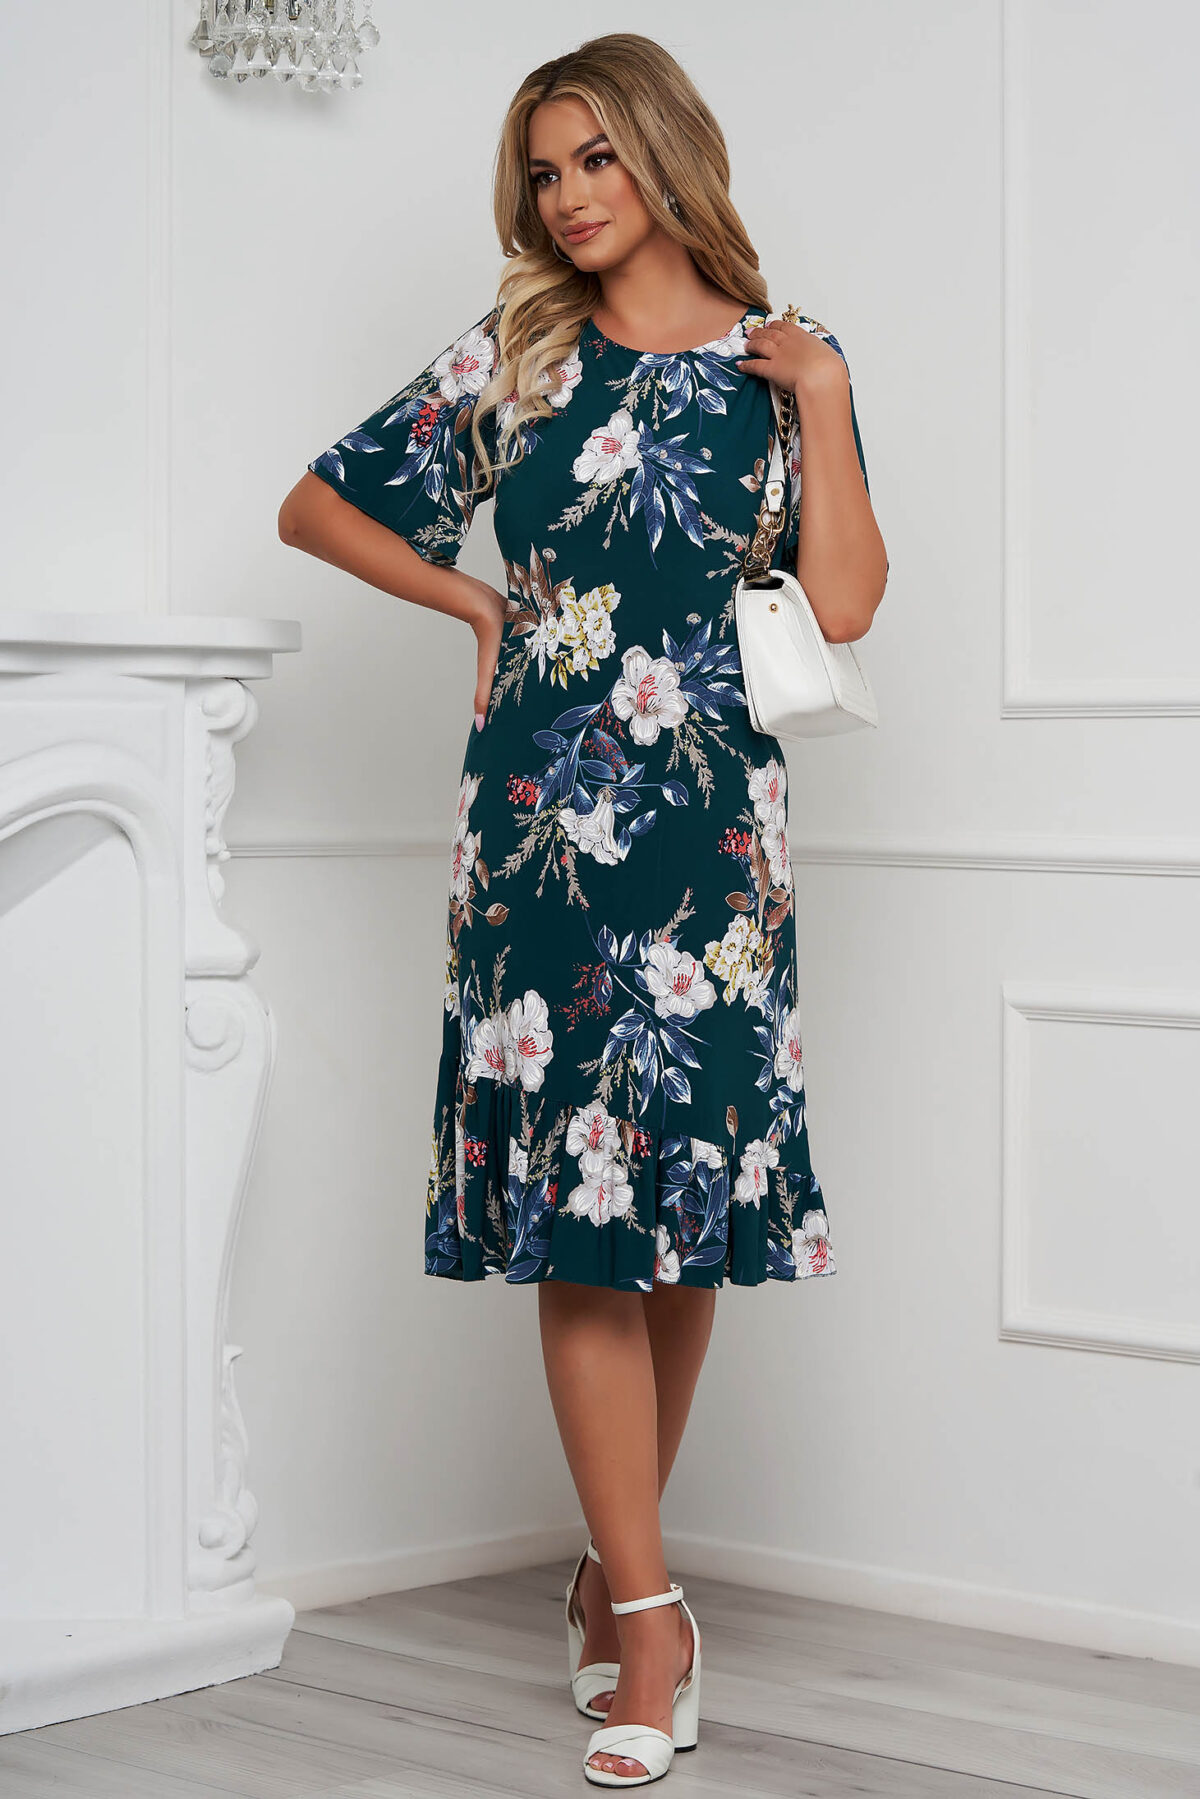 Dress Straight From Elastic Fabric With Ruffle Details With Floral Print